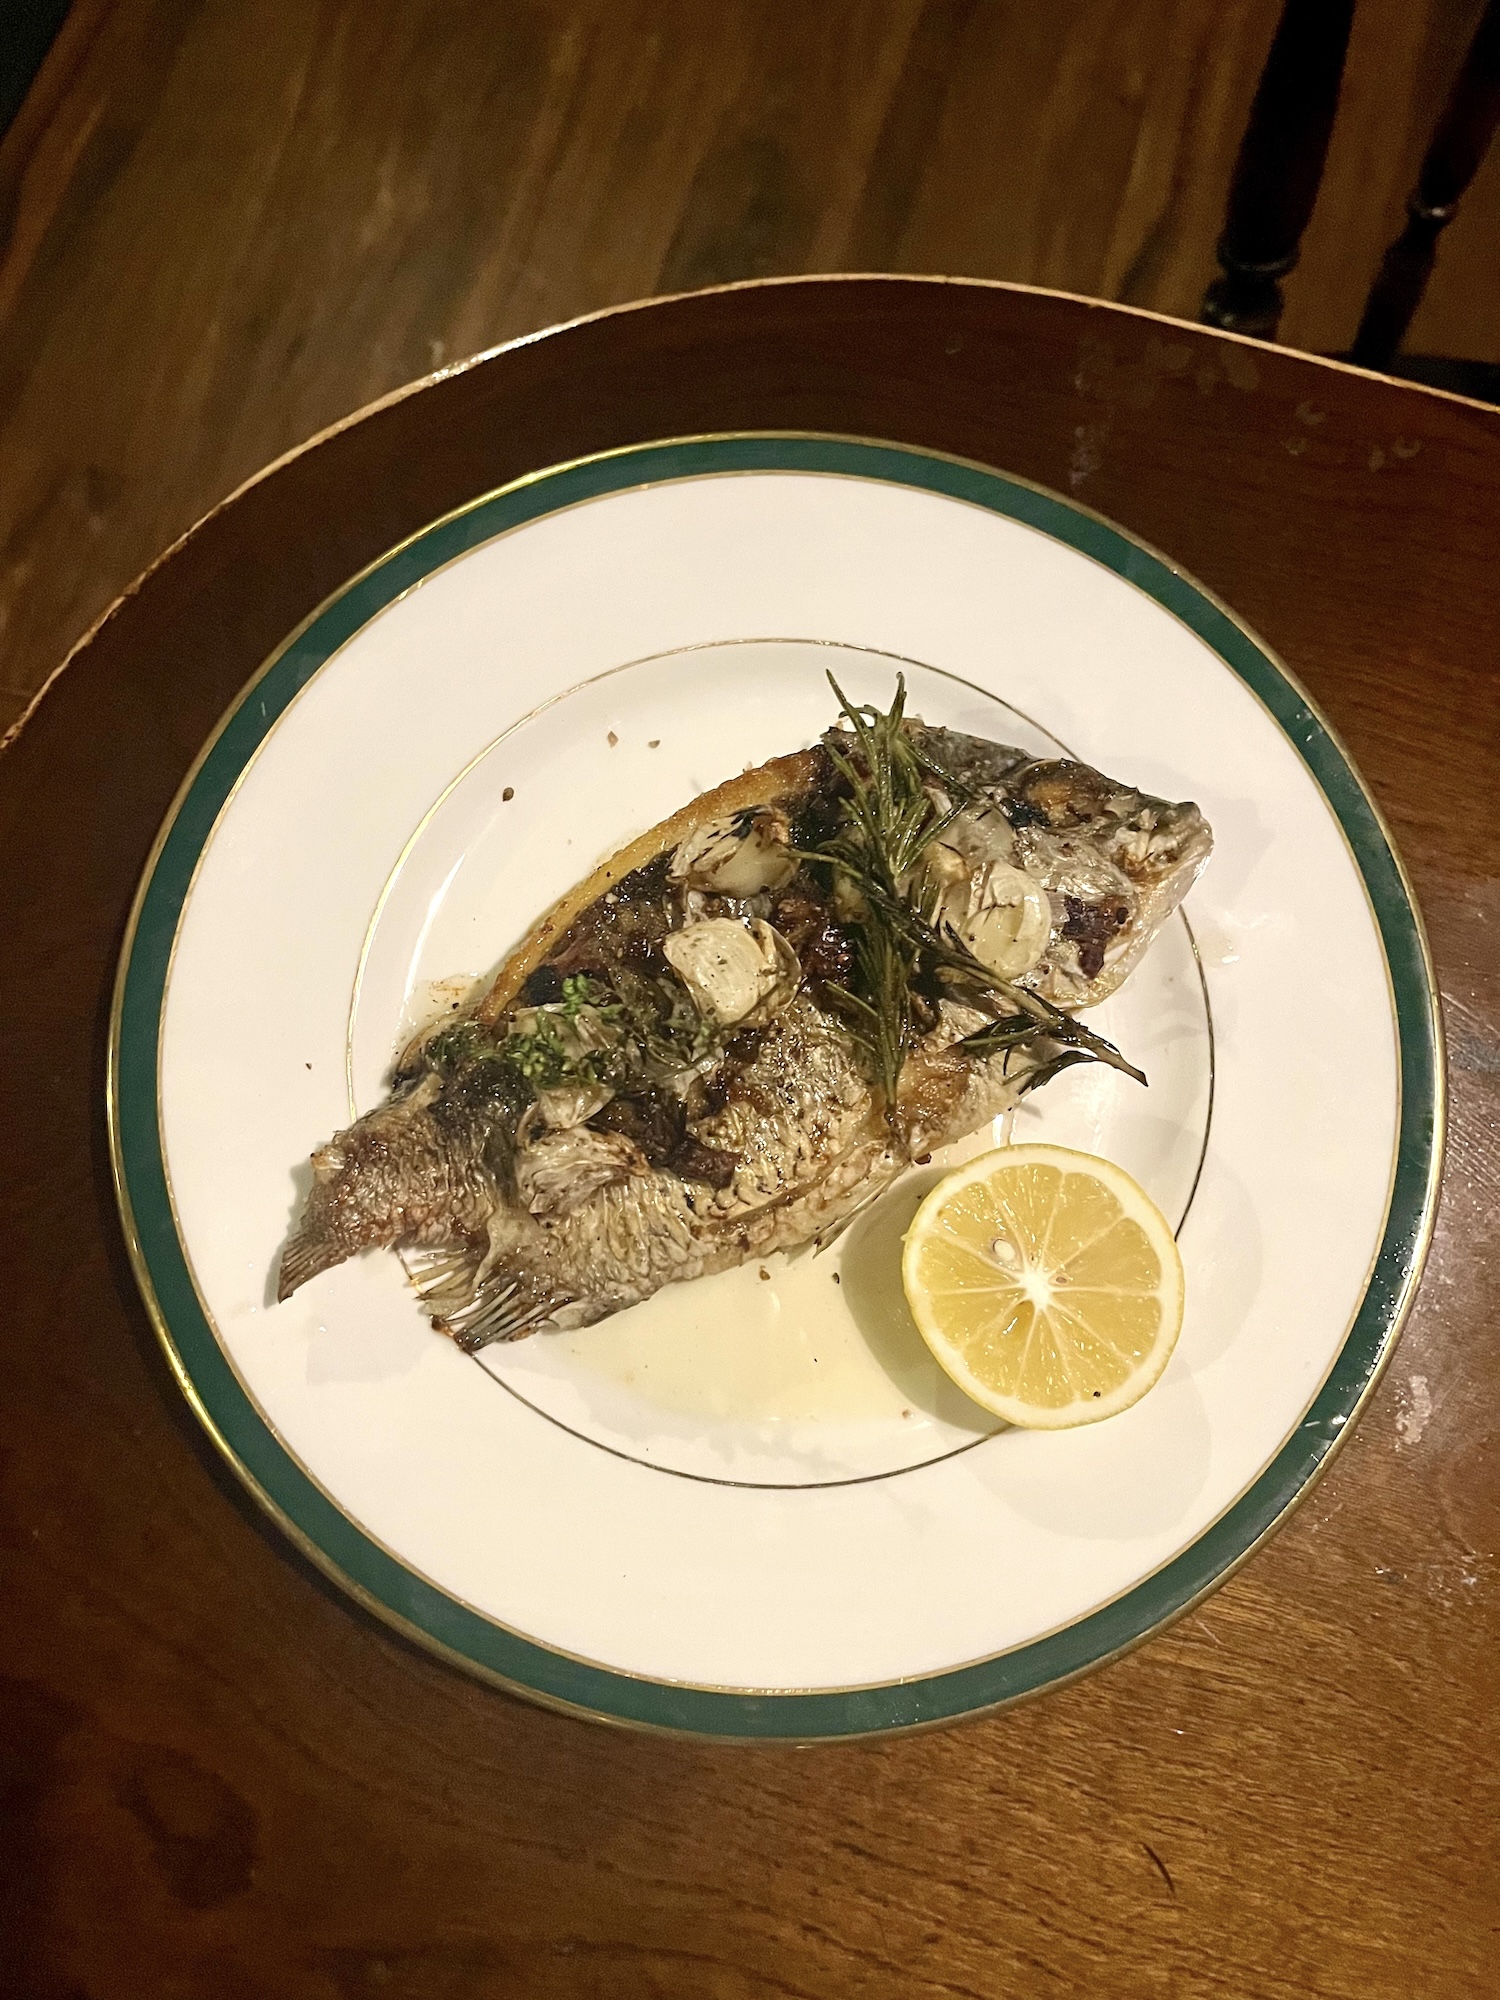 Sea bream fried in chicken fat, garlic, and rosemary